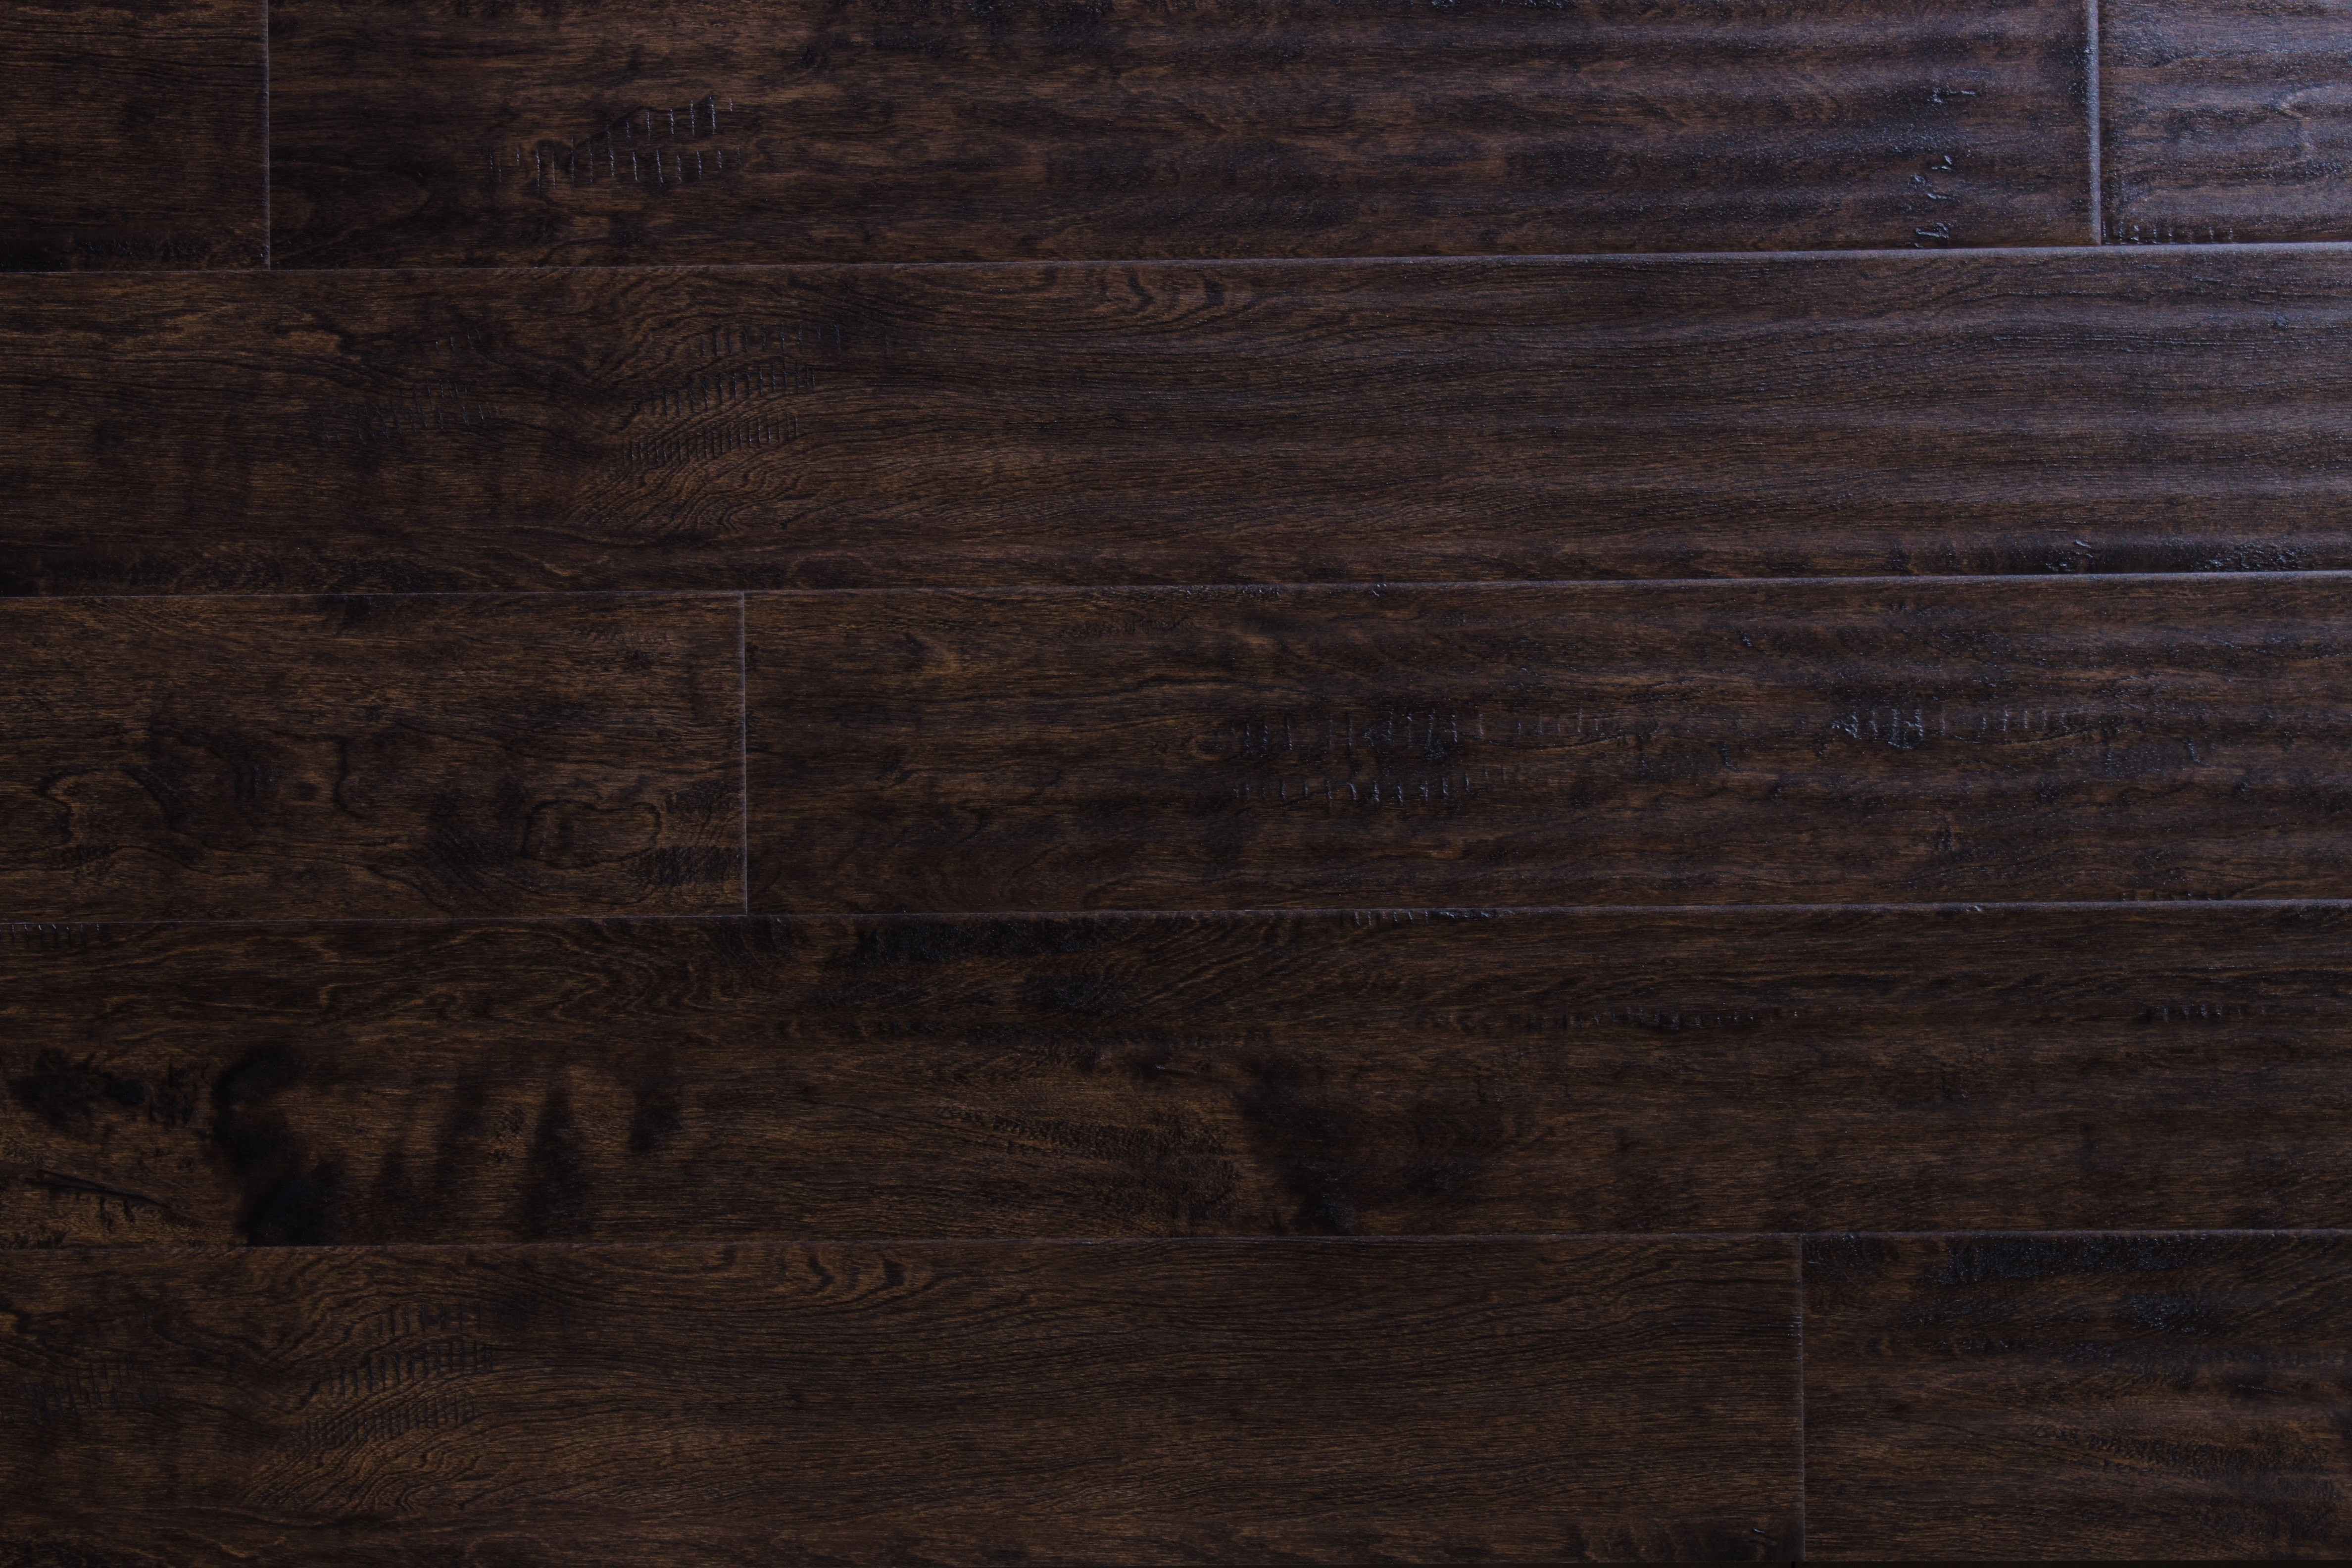 12 attractive Arizona Hardwood Floor Supply Reviews 2024 free download arizona hardwood floor supply reviews of wood flooring free samples available at builddirecta throughout tailor multi gb 5874277bb8d3c